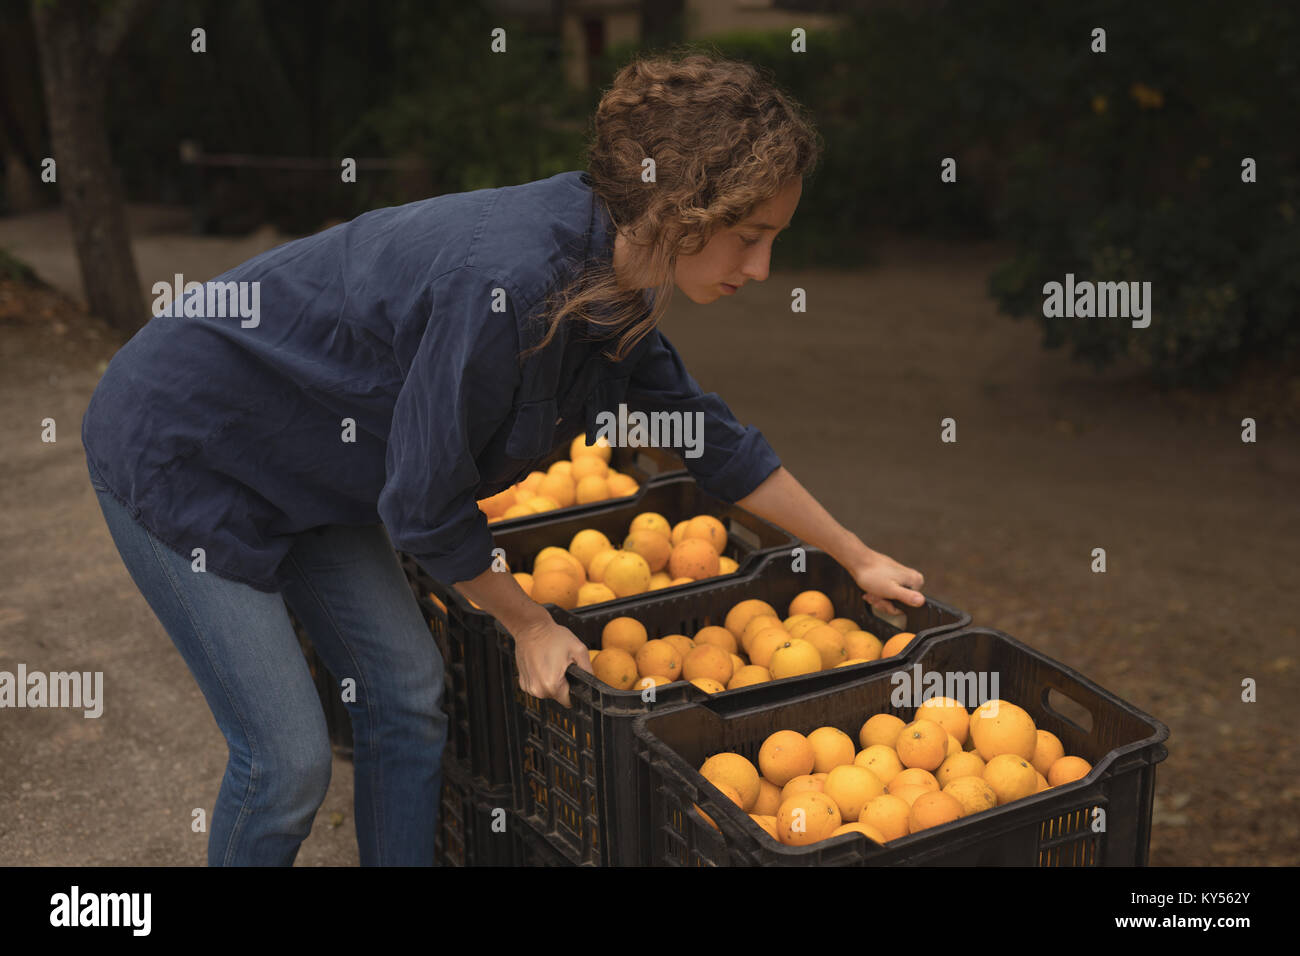 Woman lifting crate filled with oranges Stock Photo